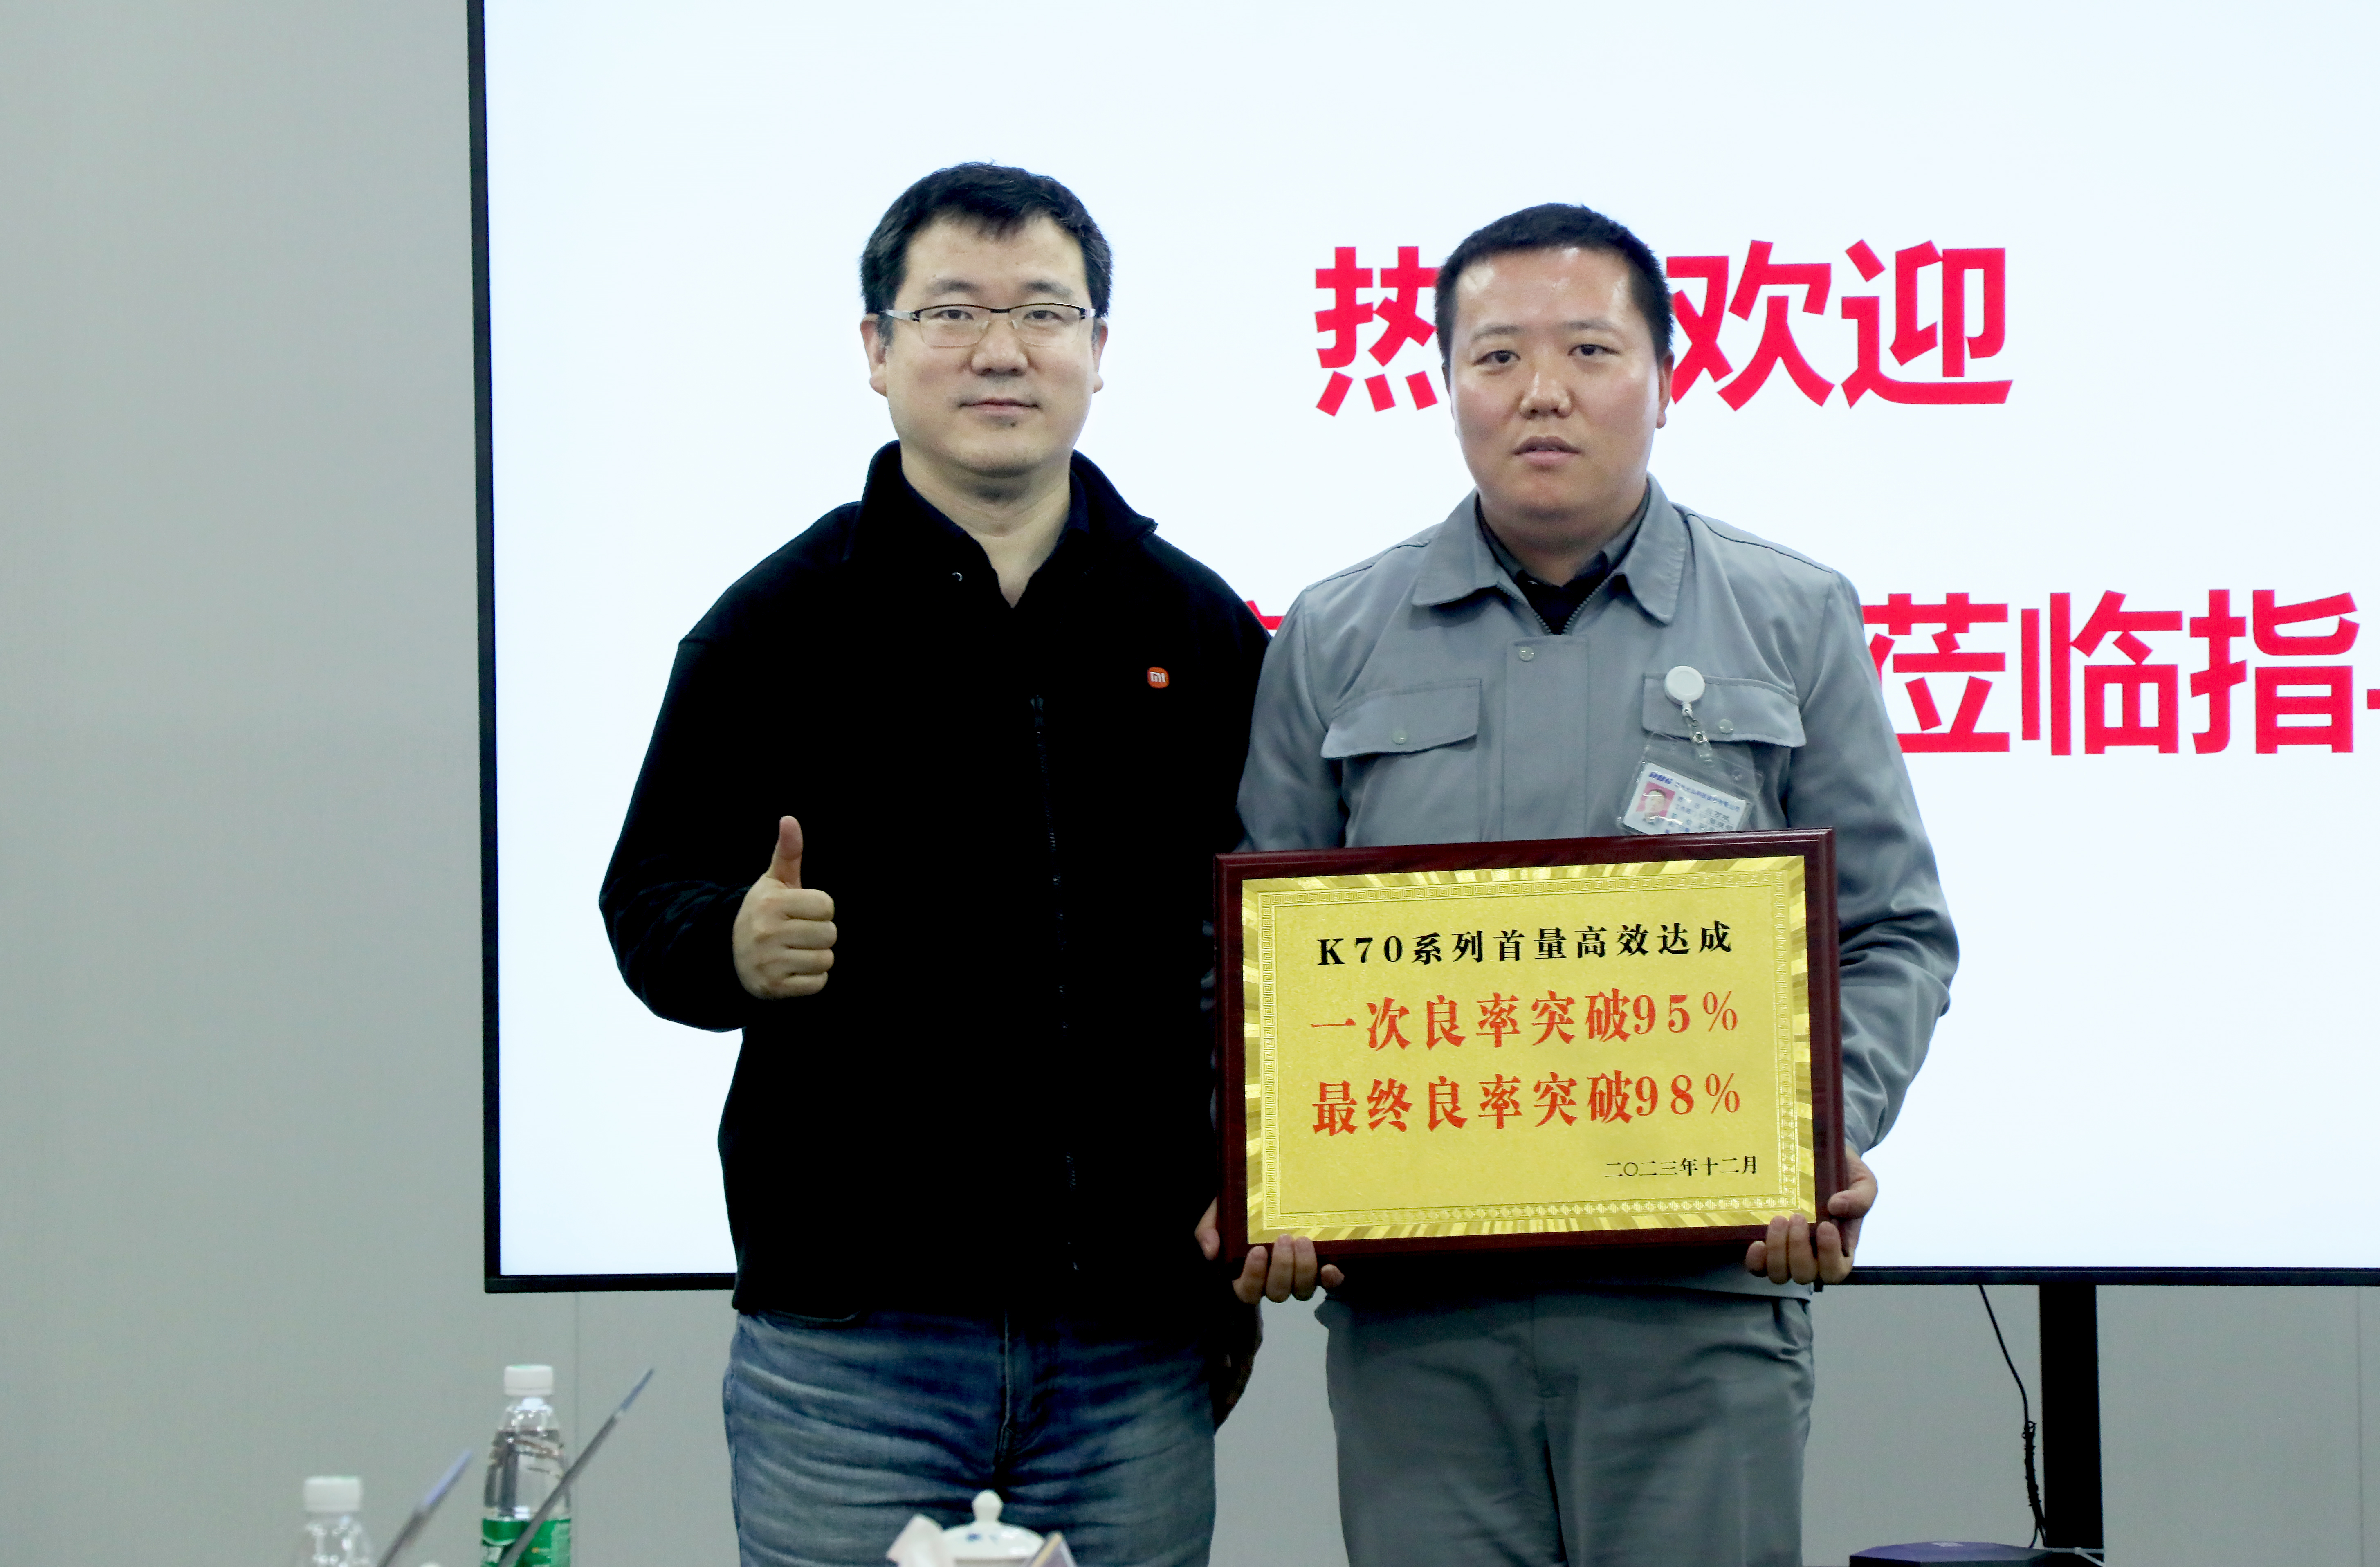 IMG 4955 拷贝 - The 2023 year-end summary meeting of DBG and Xiaomi Group.